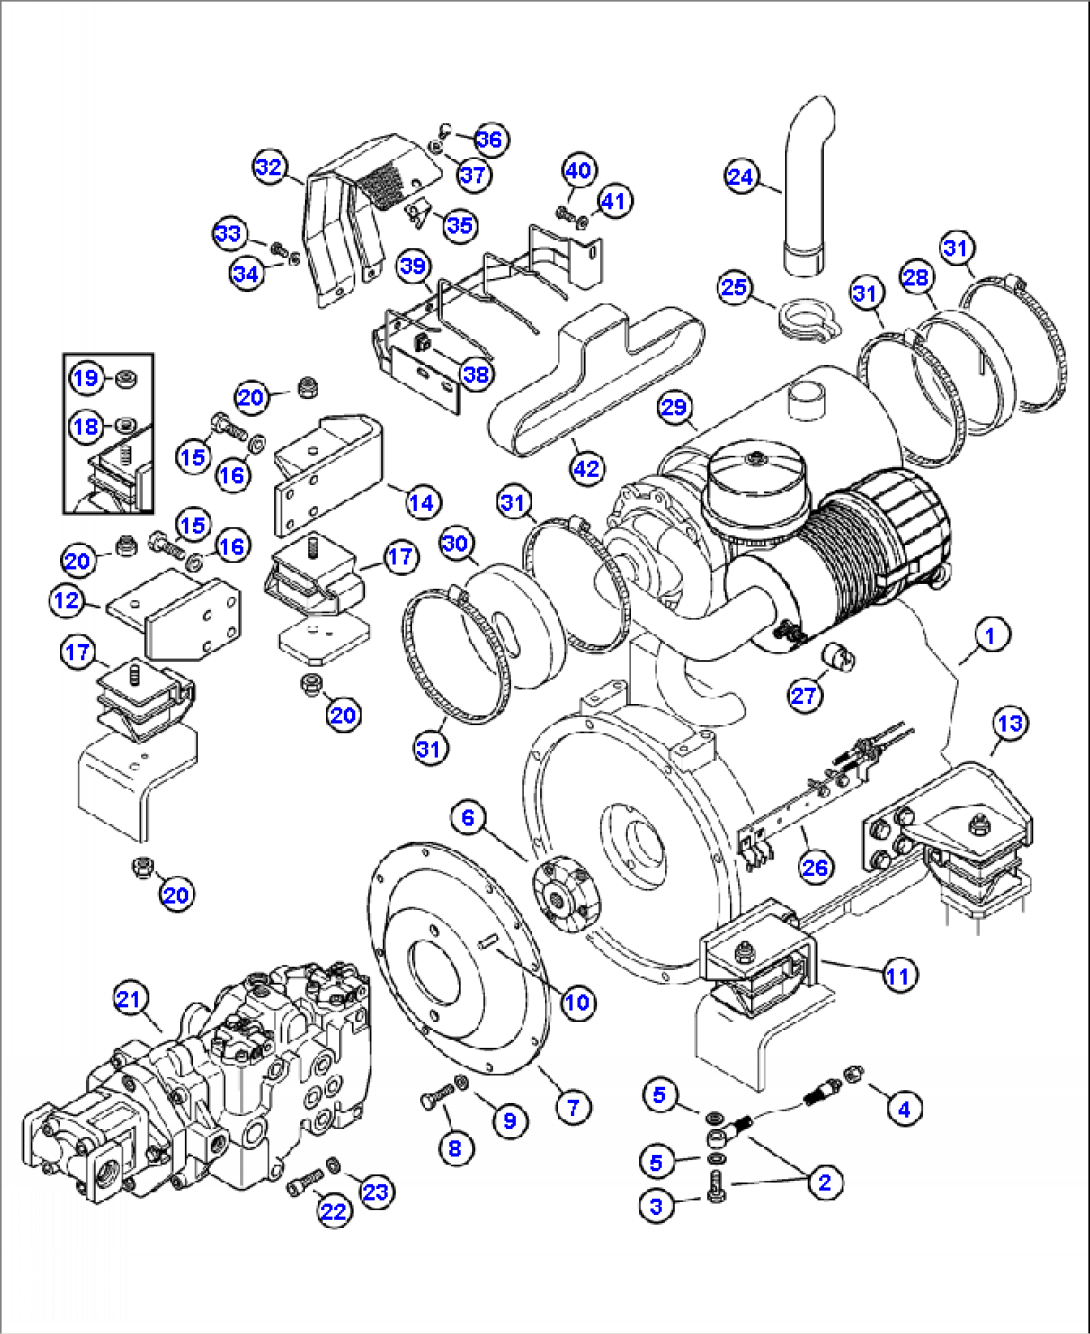 B1000-01A1 ENGINE MOUNTING AND EXHAUST WITH PRE-CLEANERER